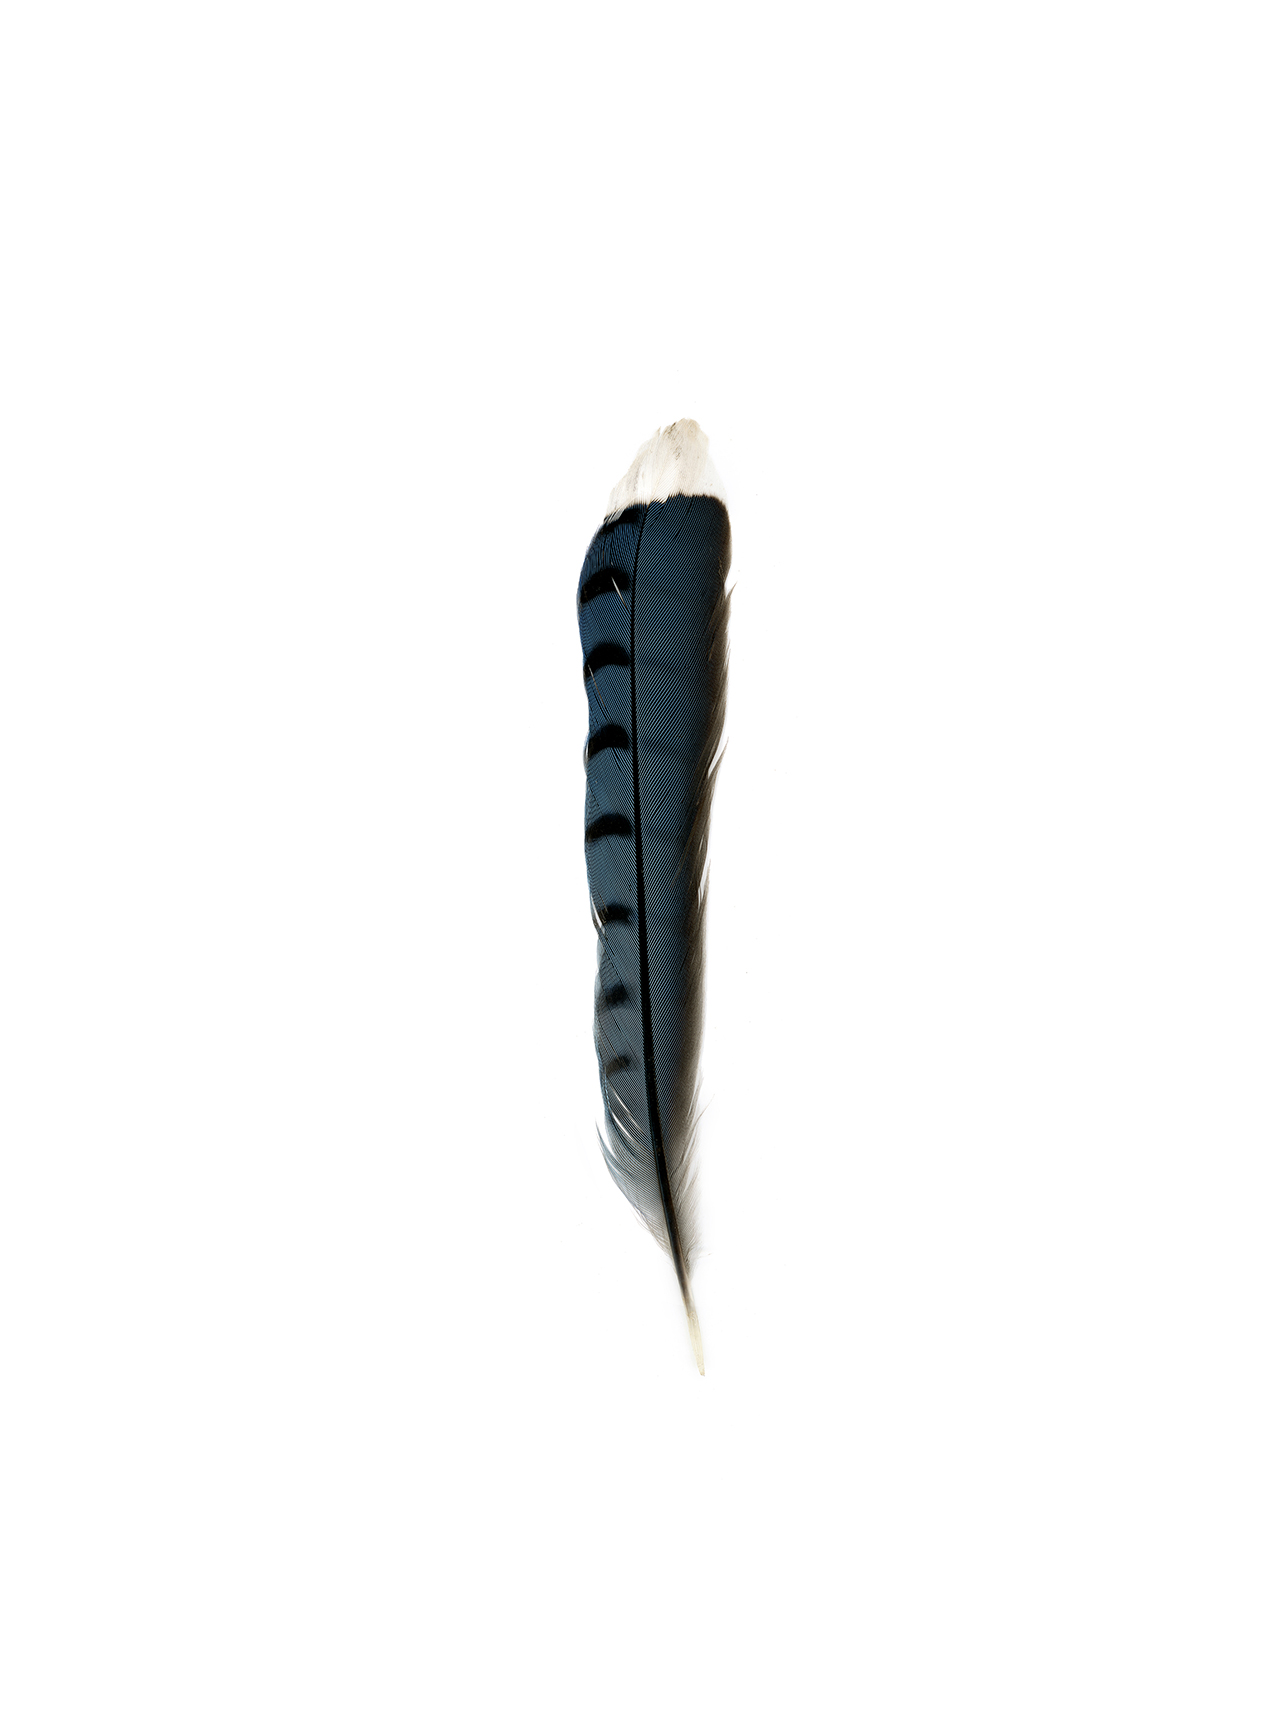 feather6